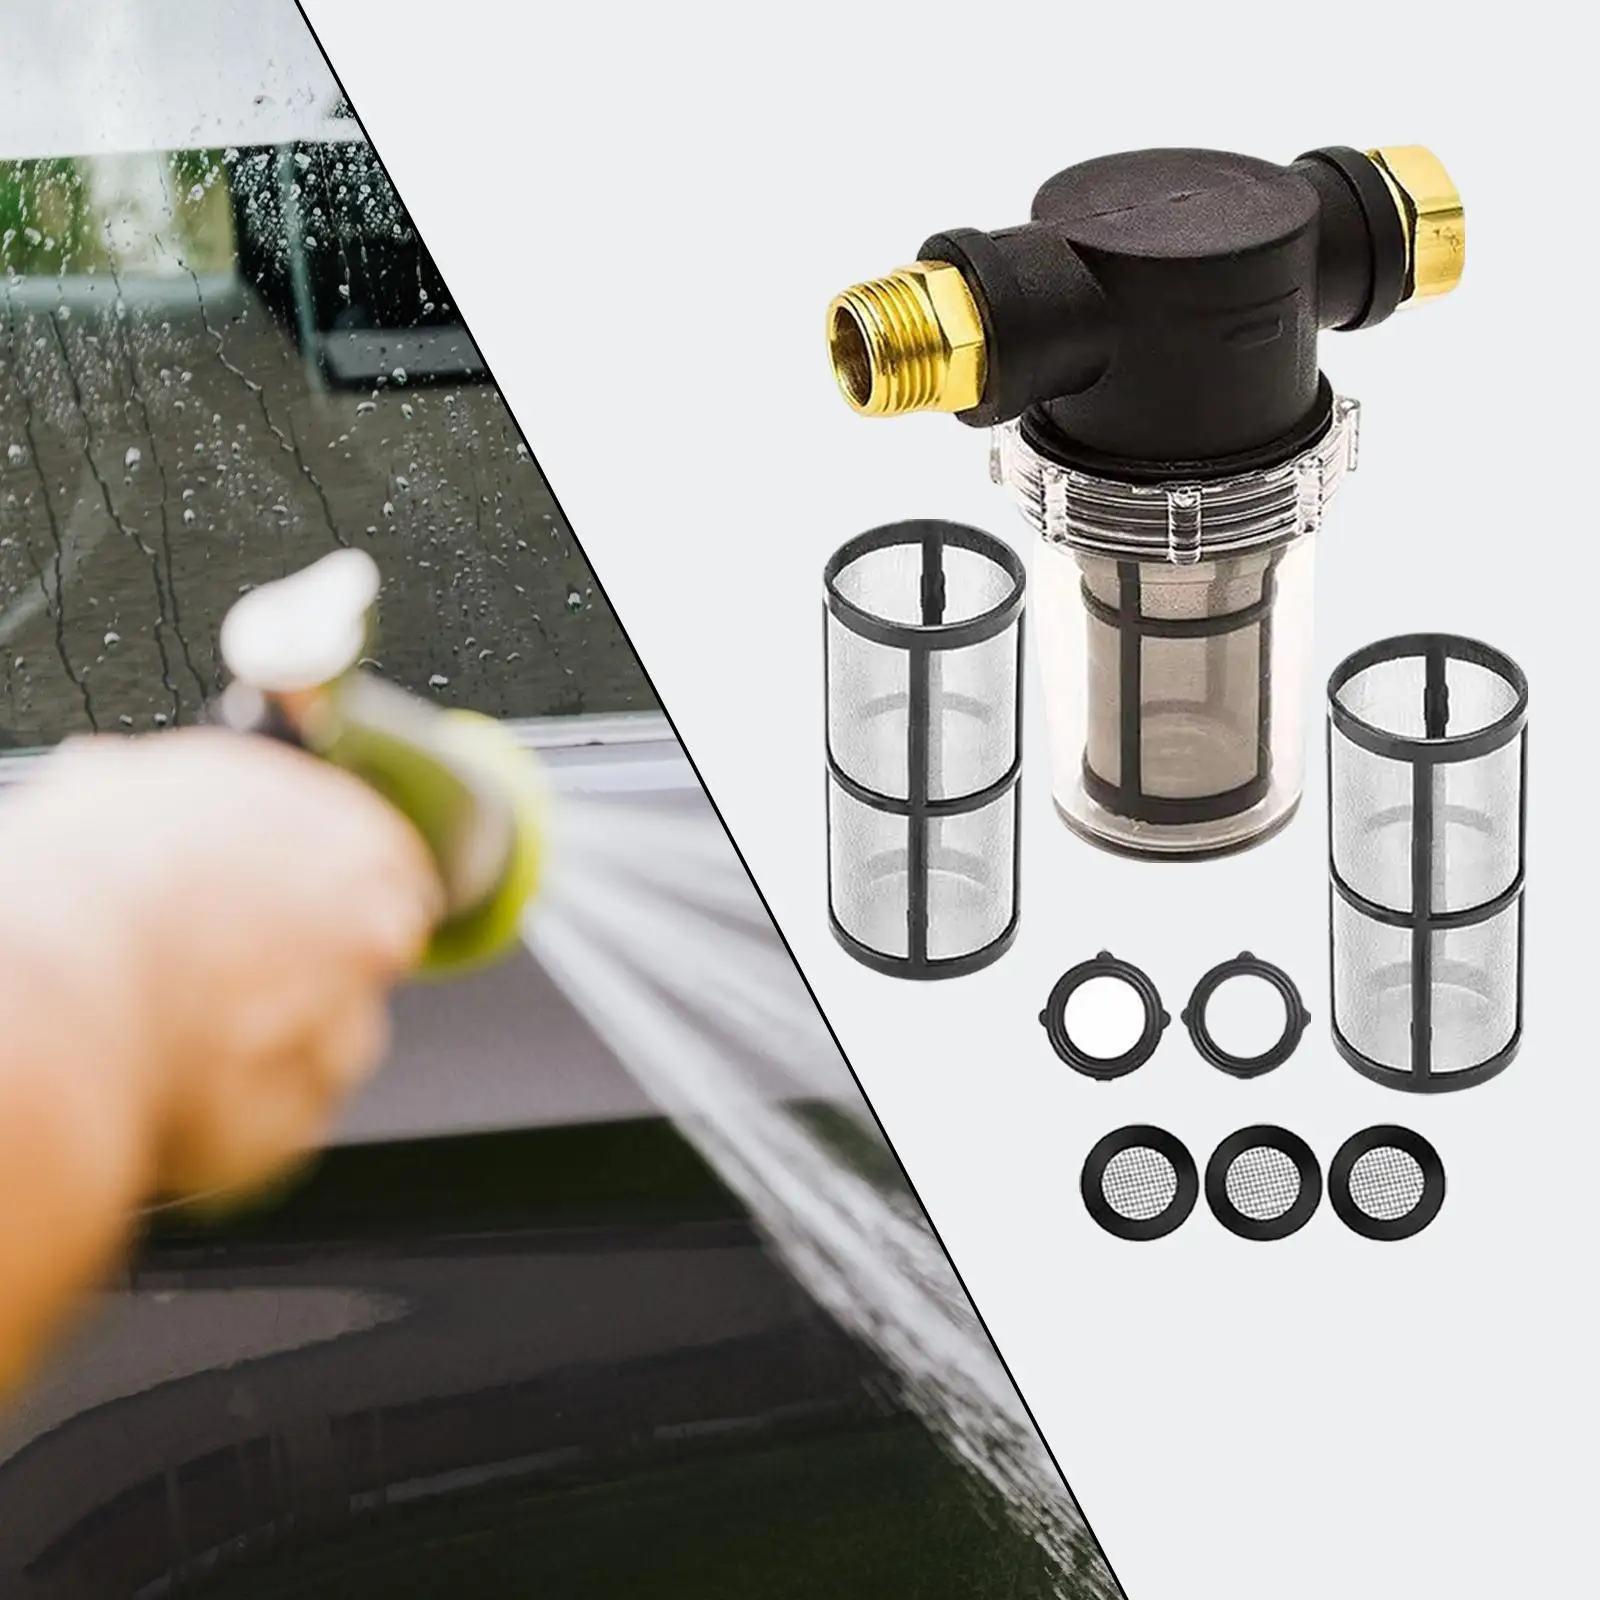 Filter for Pressure Washer Inlet Water with Washer Water Strainer Filter Garden Hose Sediment Filter for RV